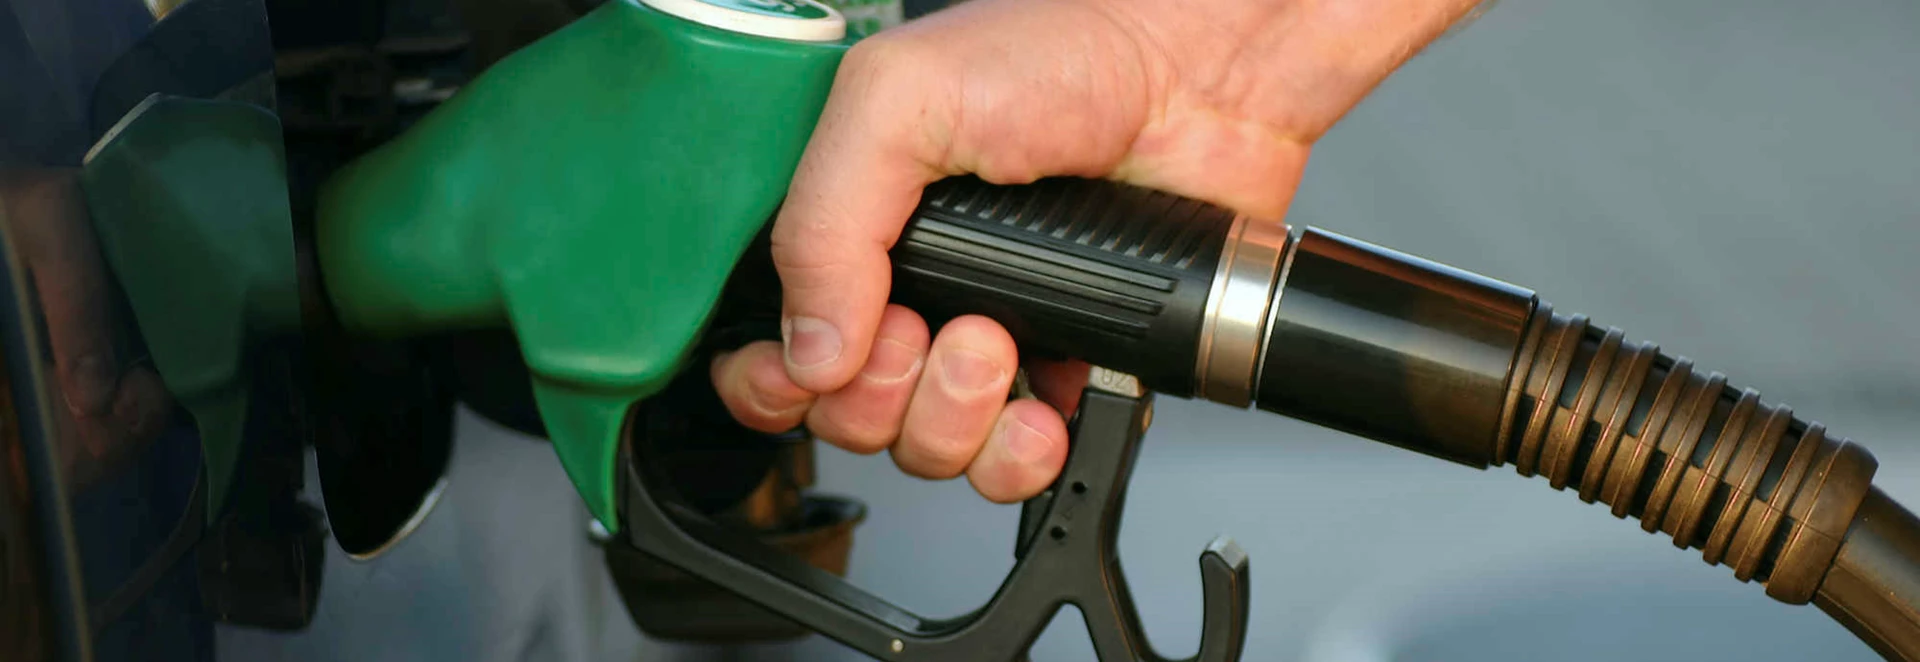 Why is petrol for cars called unleaded? 